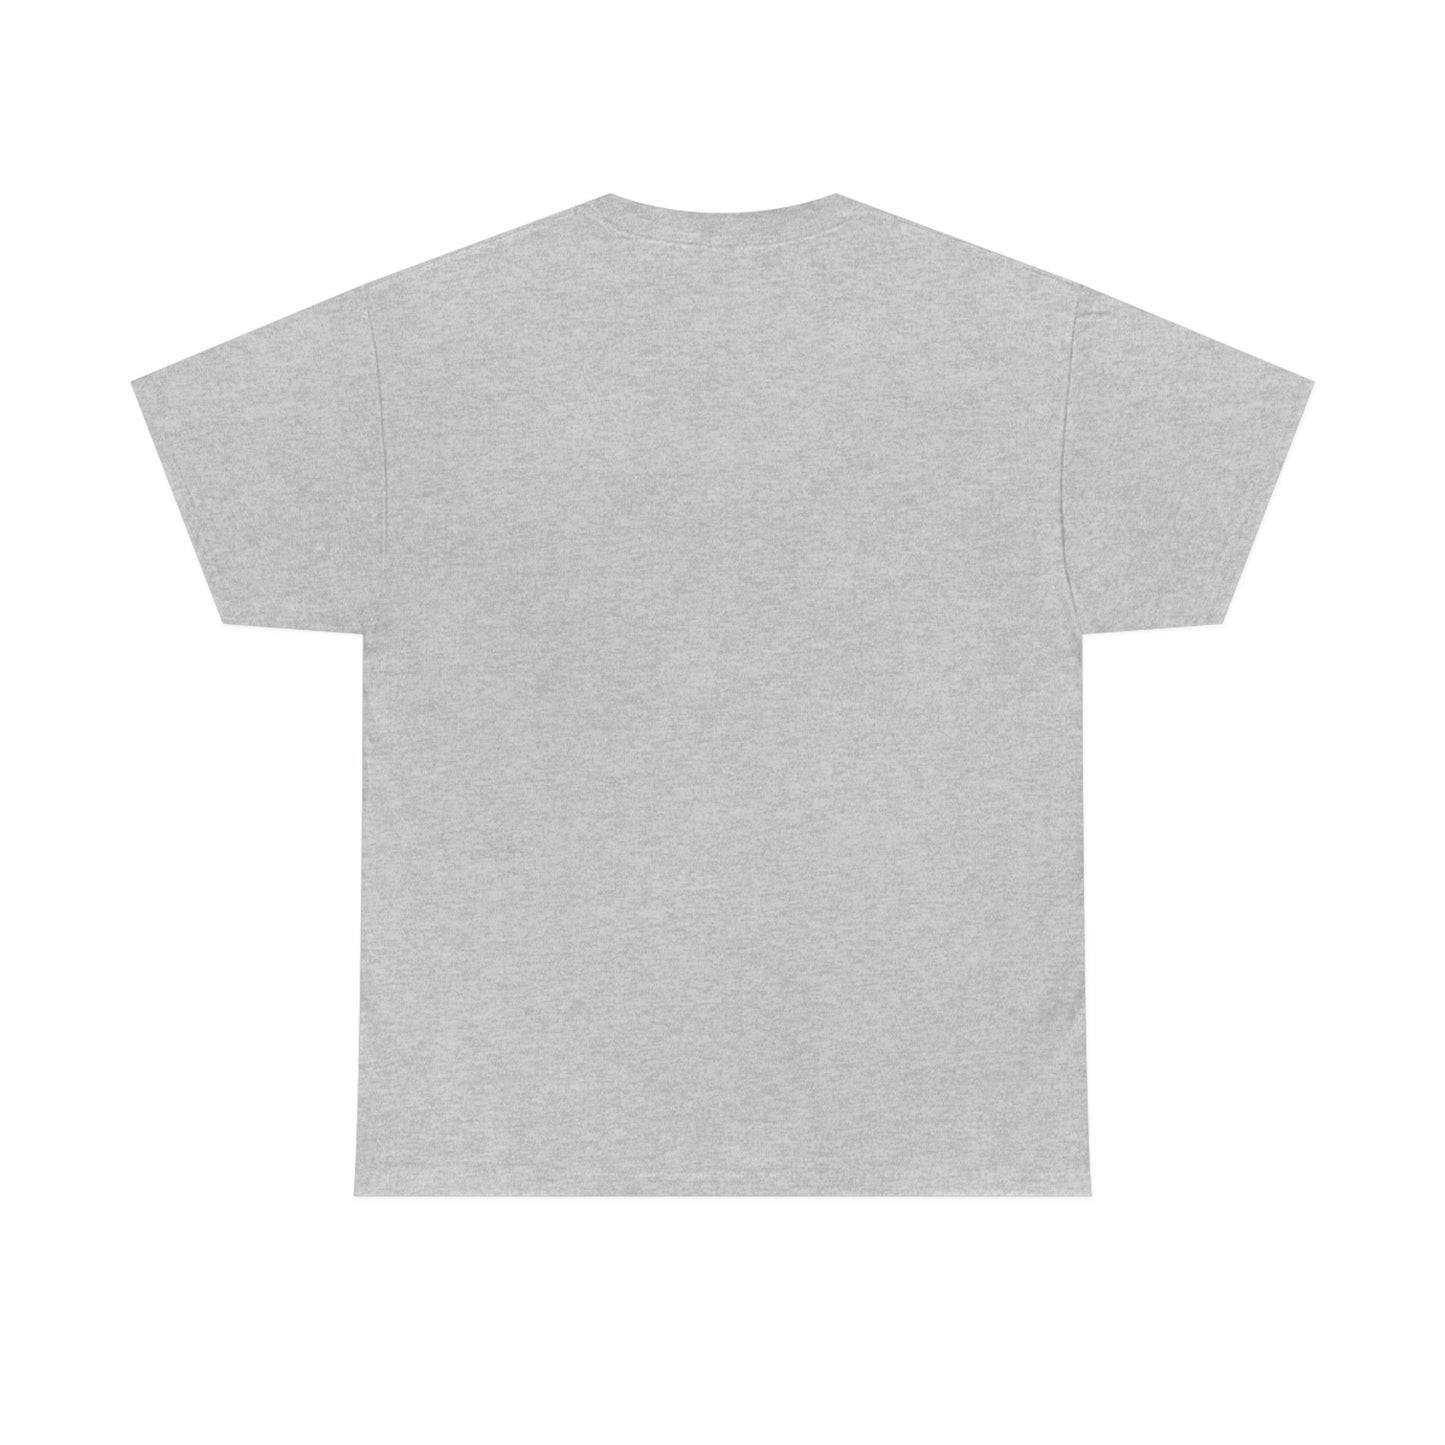 Adult Heavy Cotton Tee, South Tiger Classic (Multiple Colors Available)